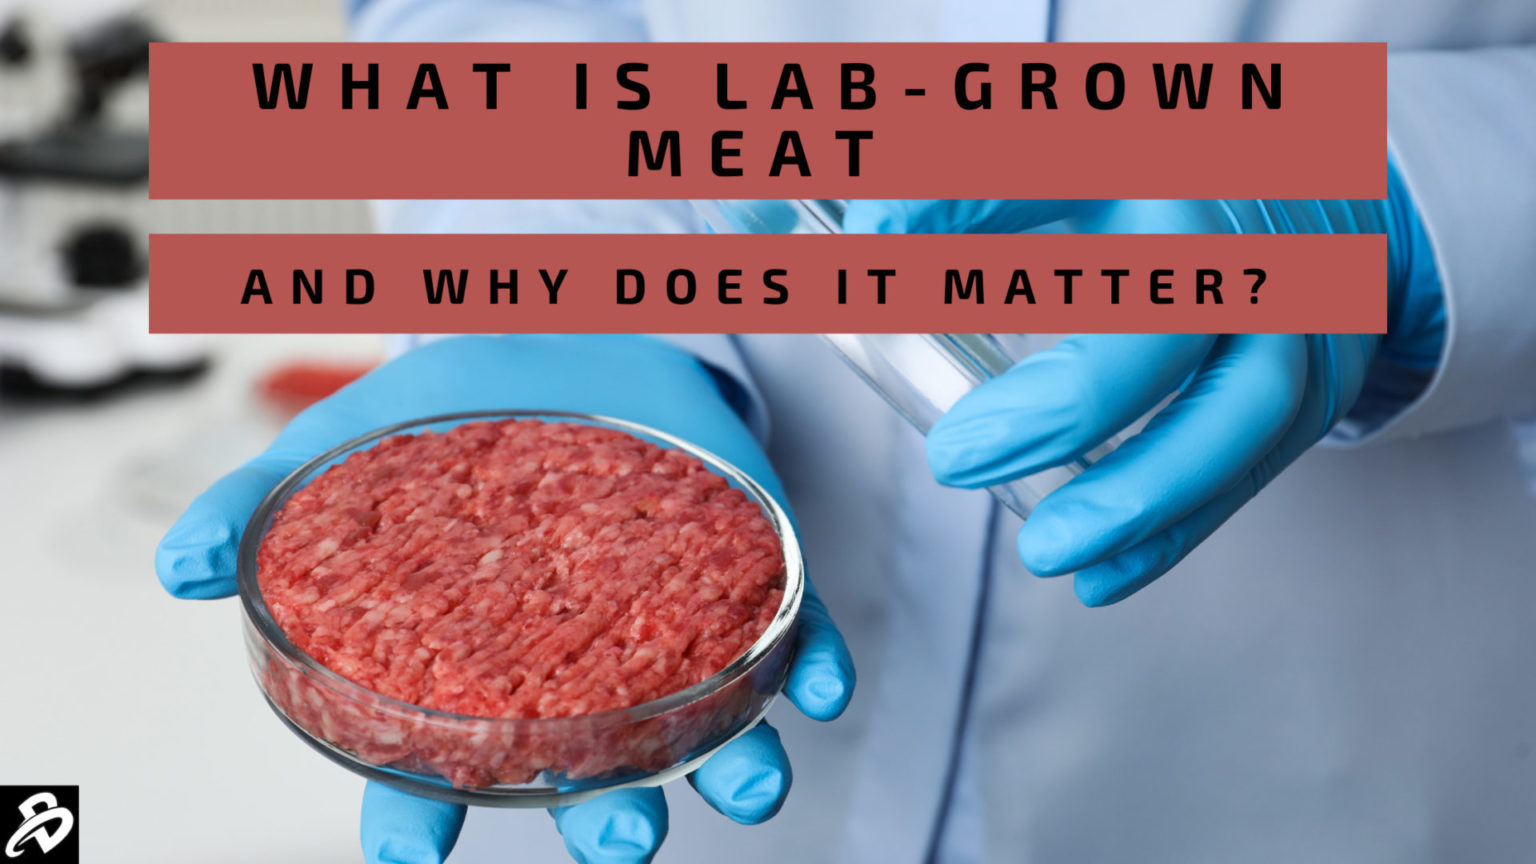 essay about lab grown meat